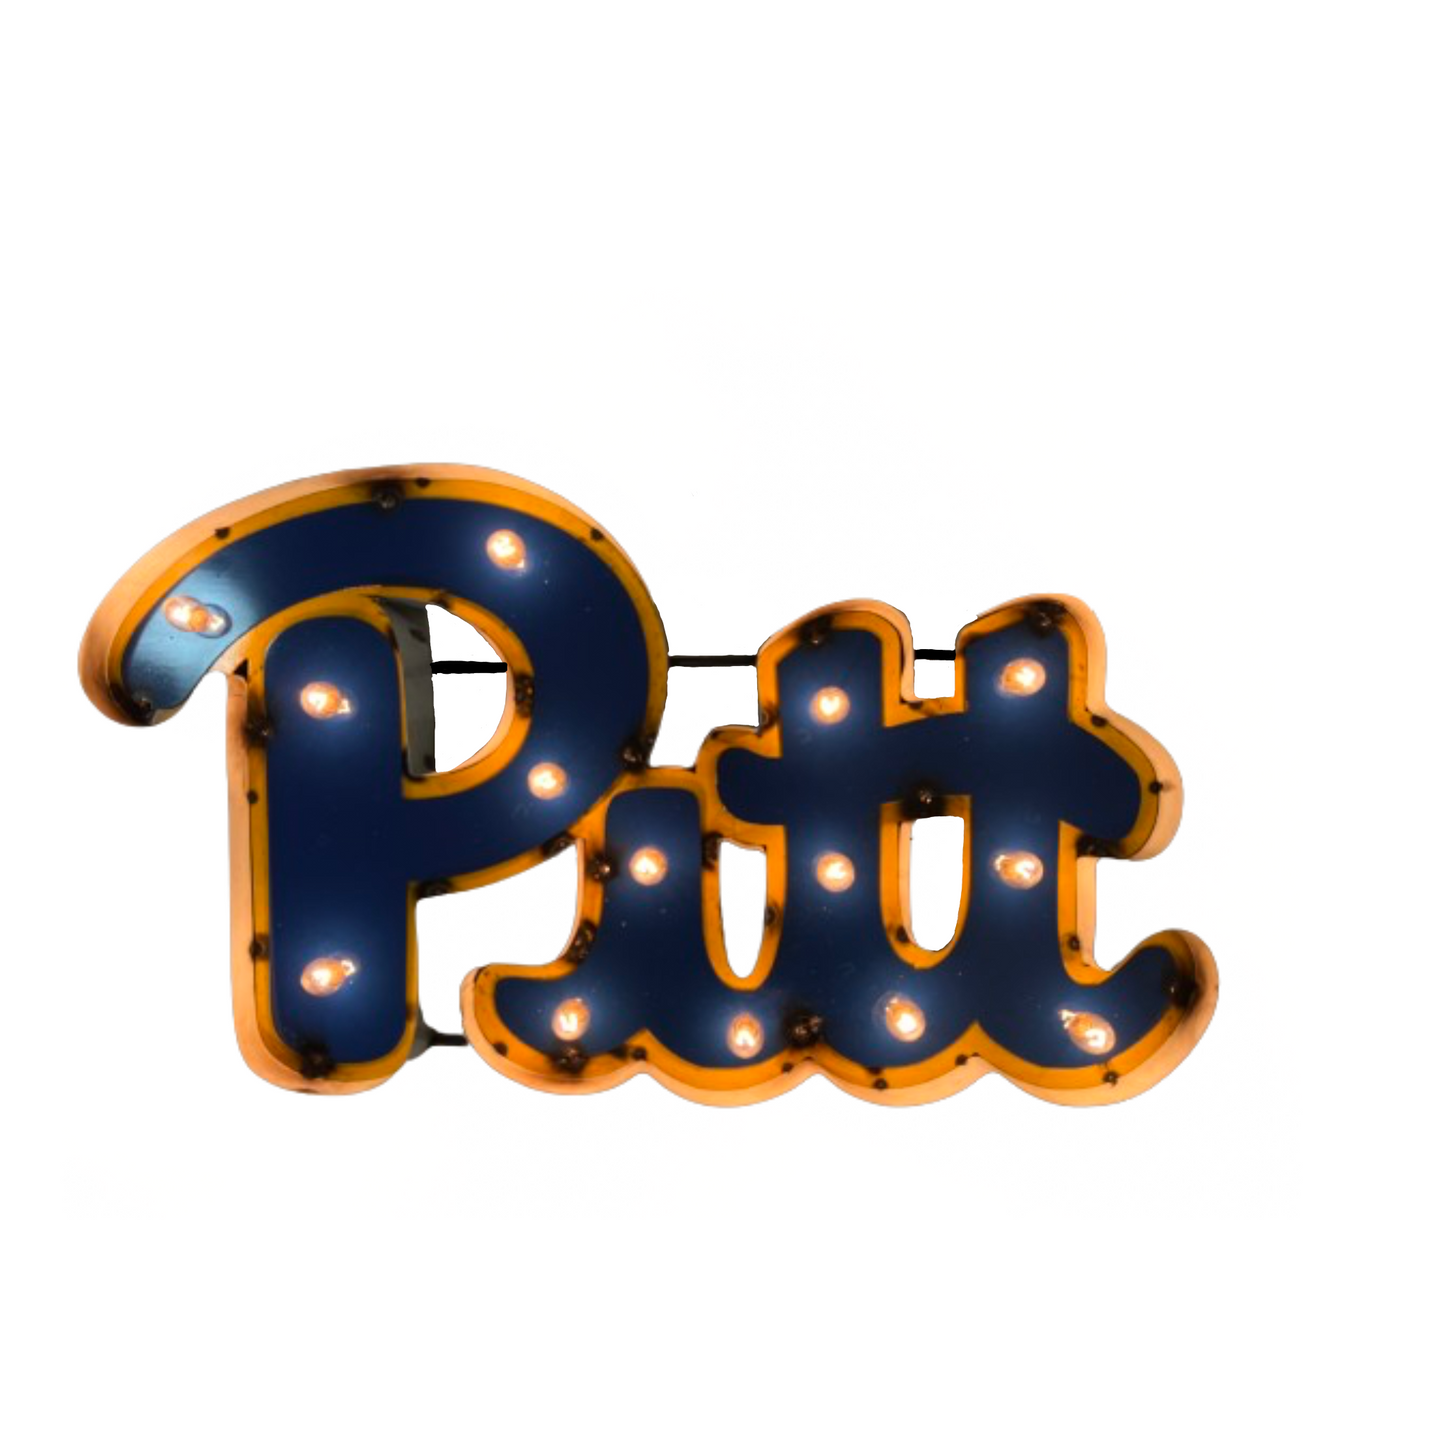 The University of Pittsburgh Panthers Illuminated Recycled Metal Wall Decor